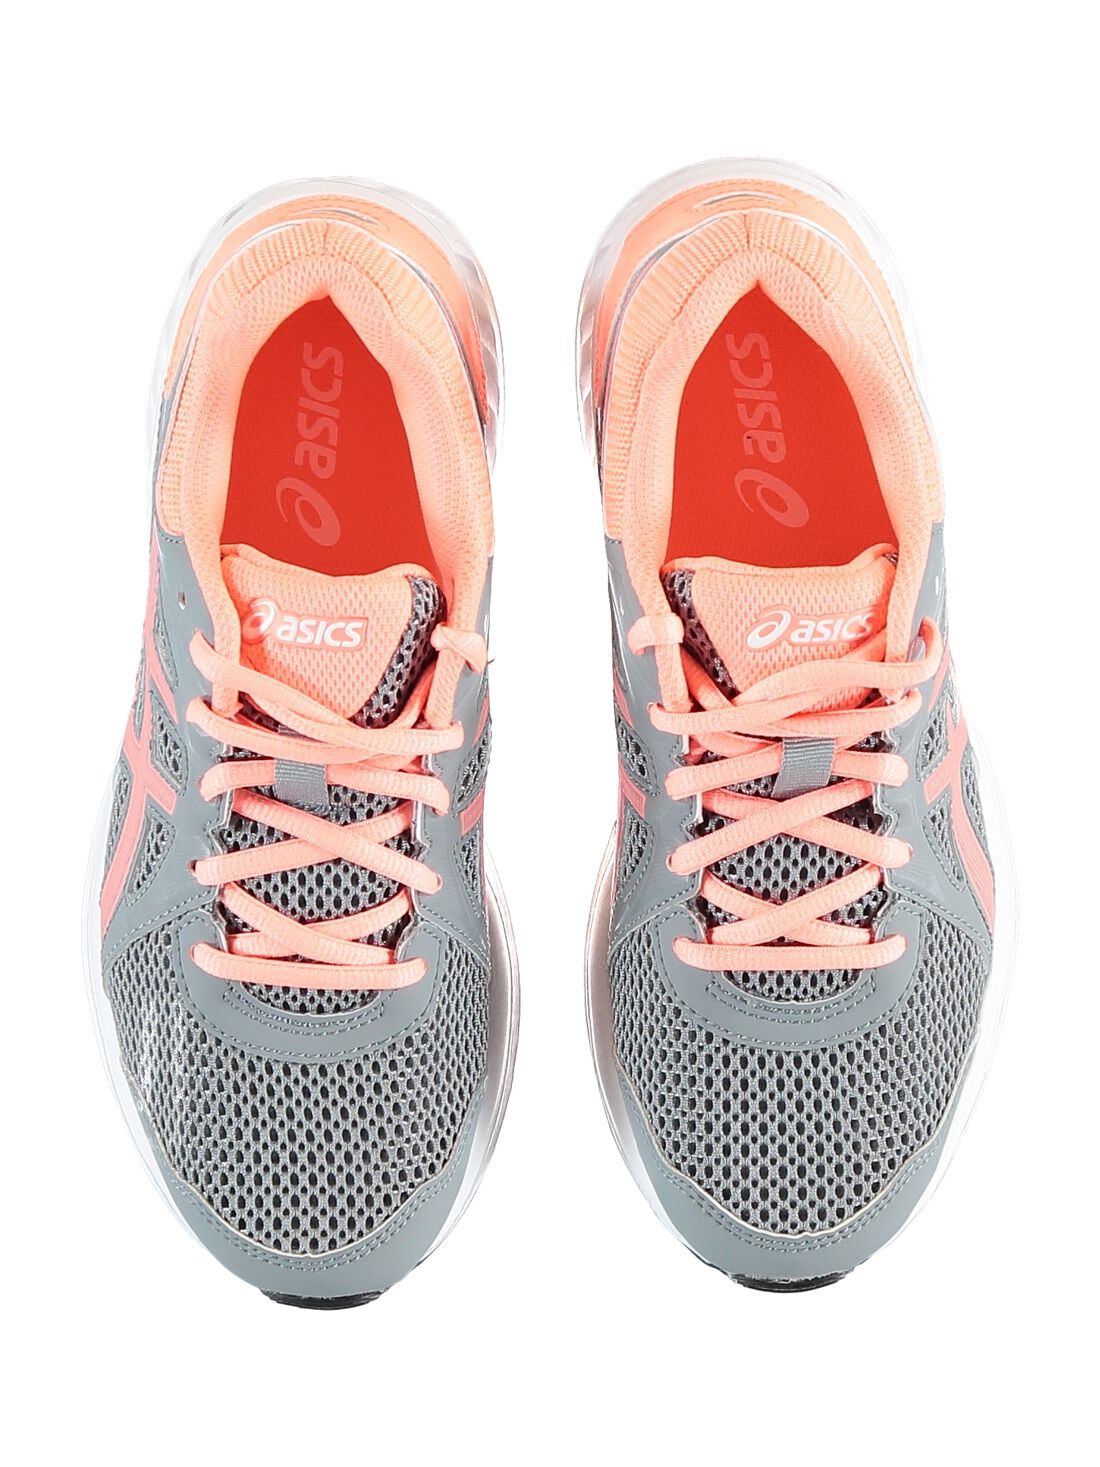 chaussure fille asics